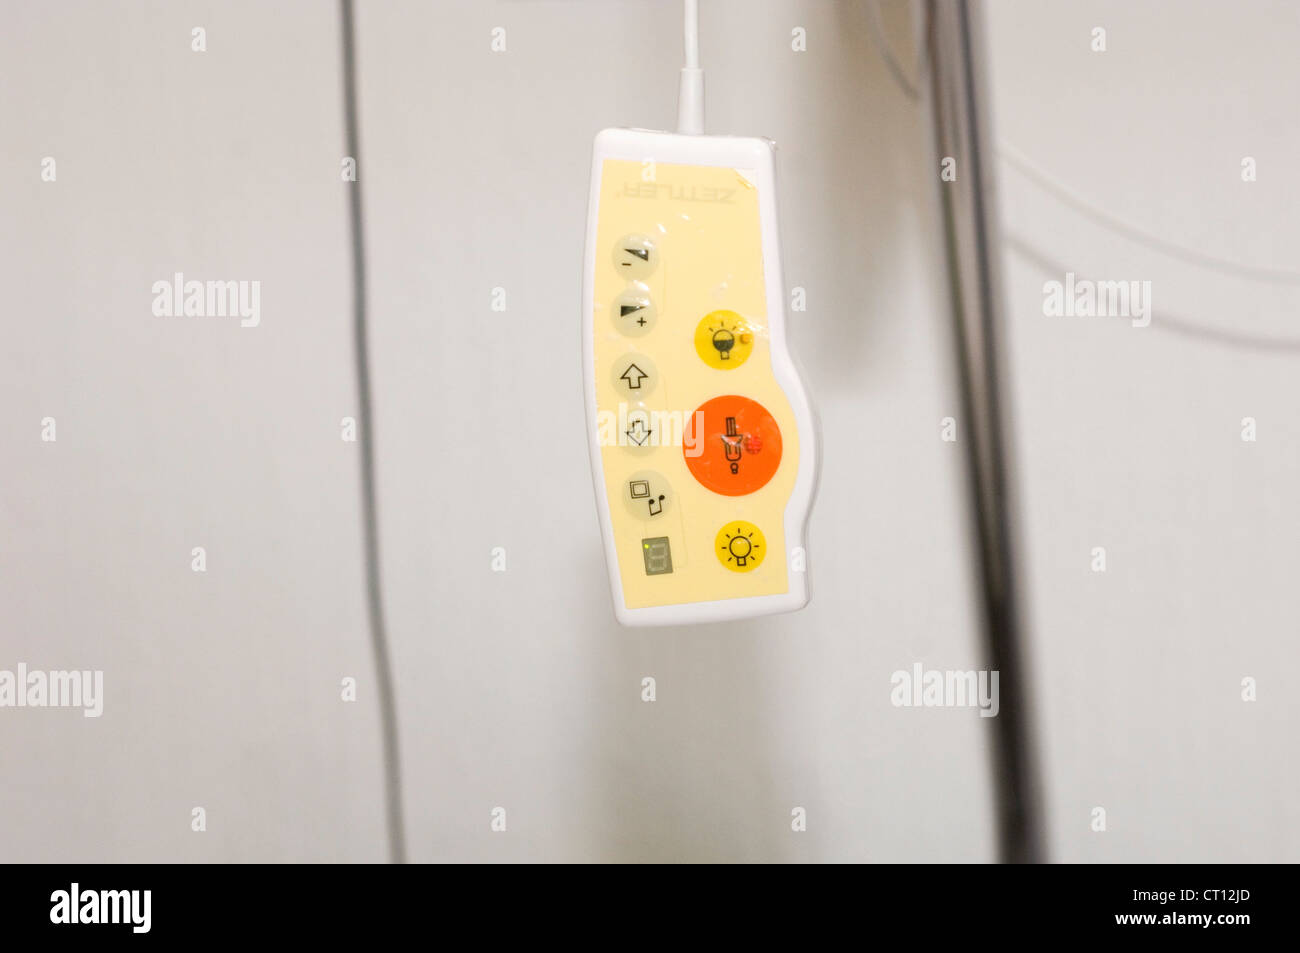 An electronic unit to control the height of a hospital bed and lights. Stock Photo